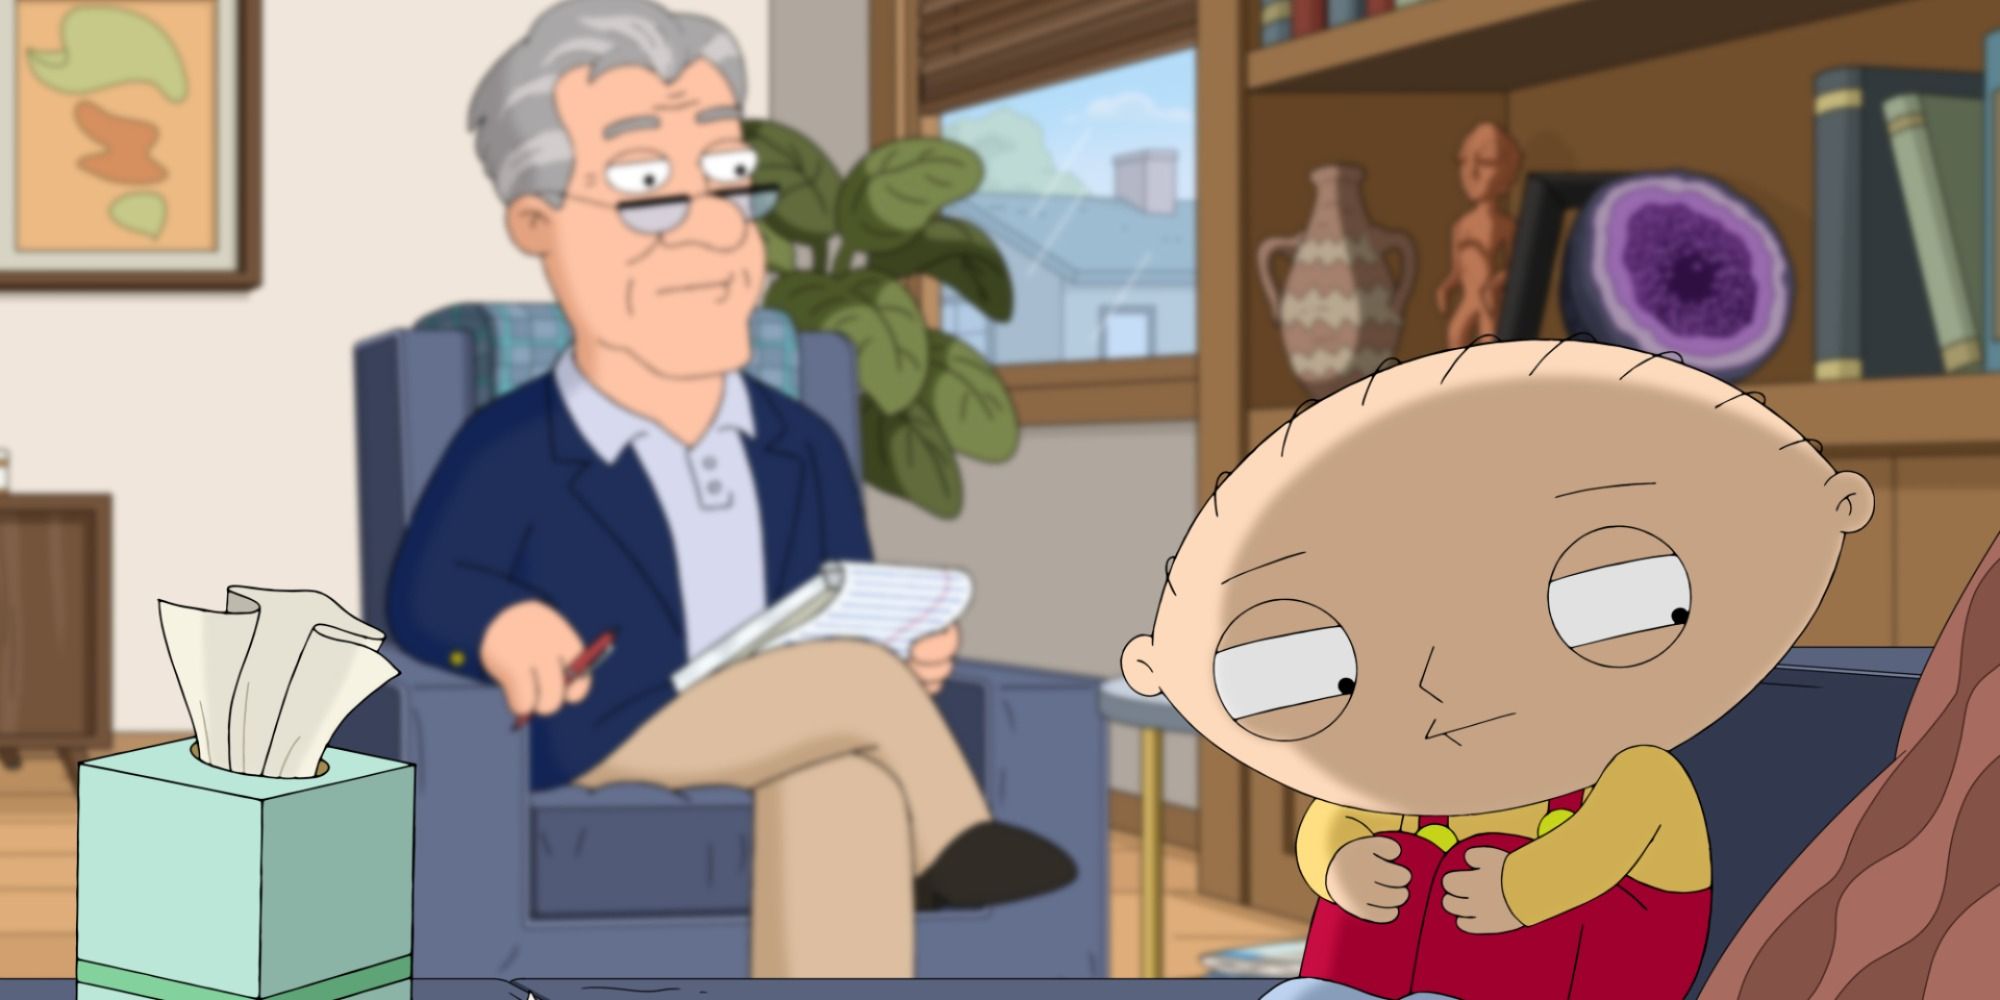 Stewie crouched in a corner in an office